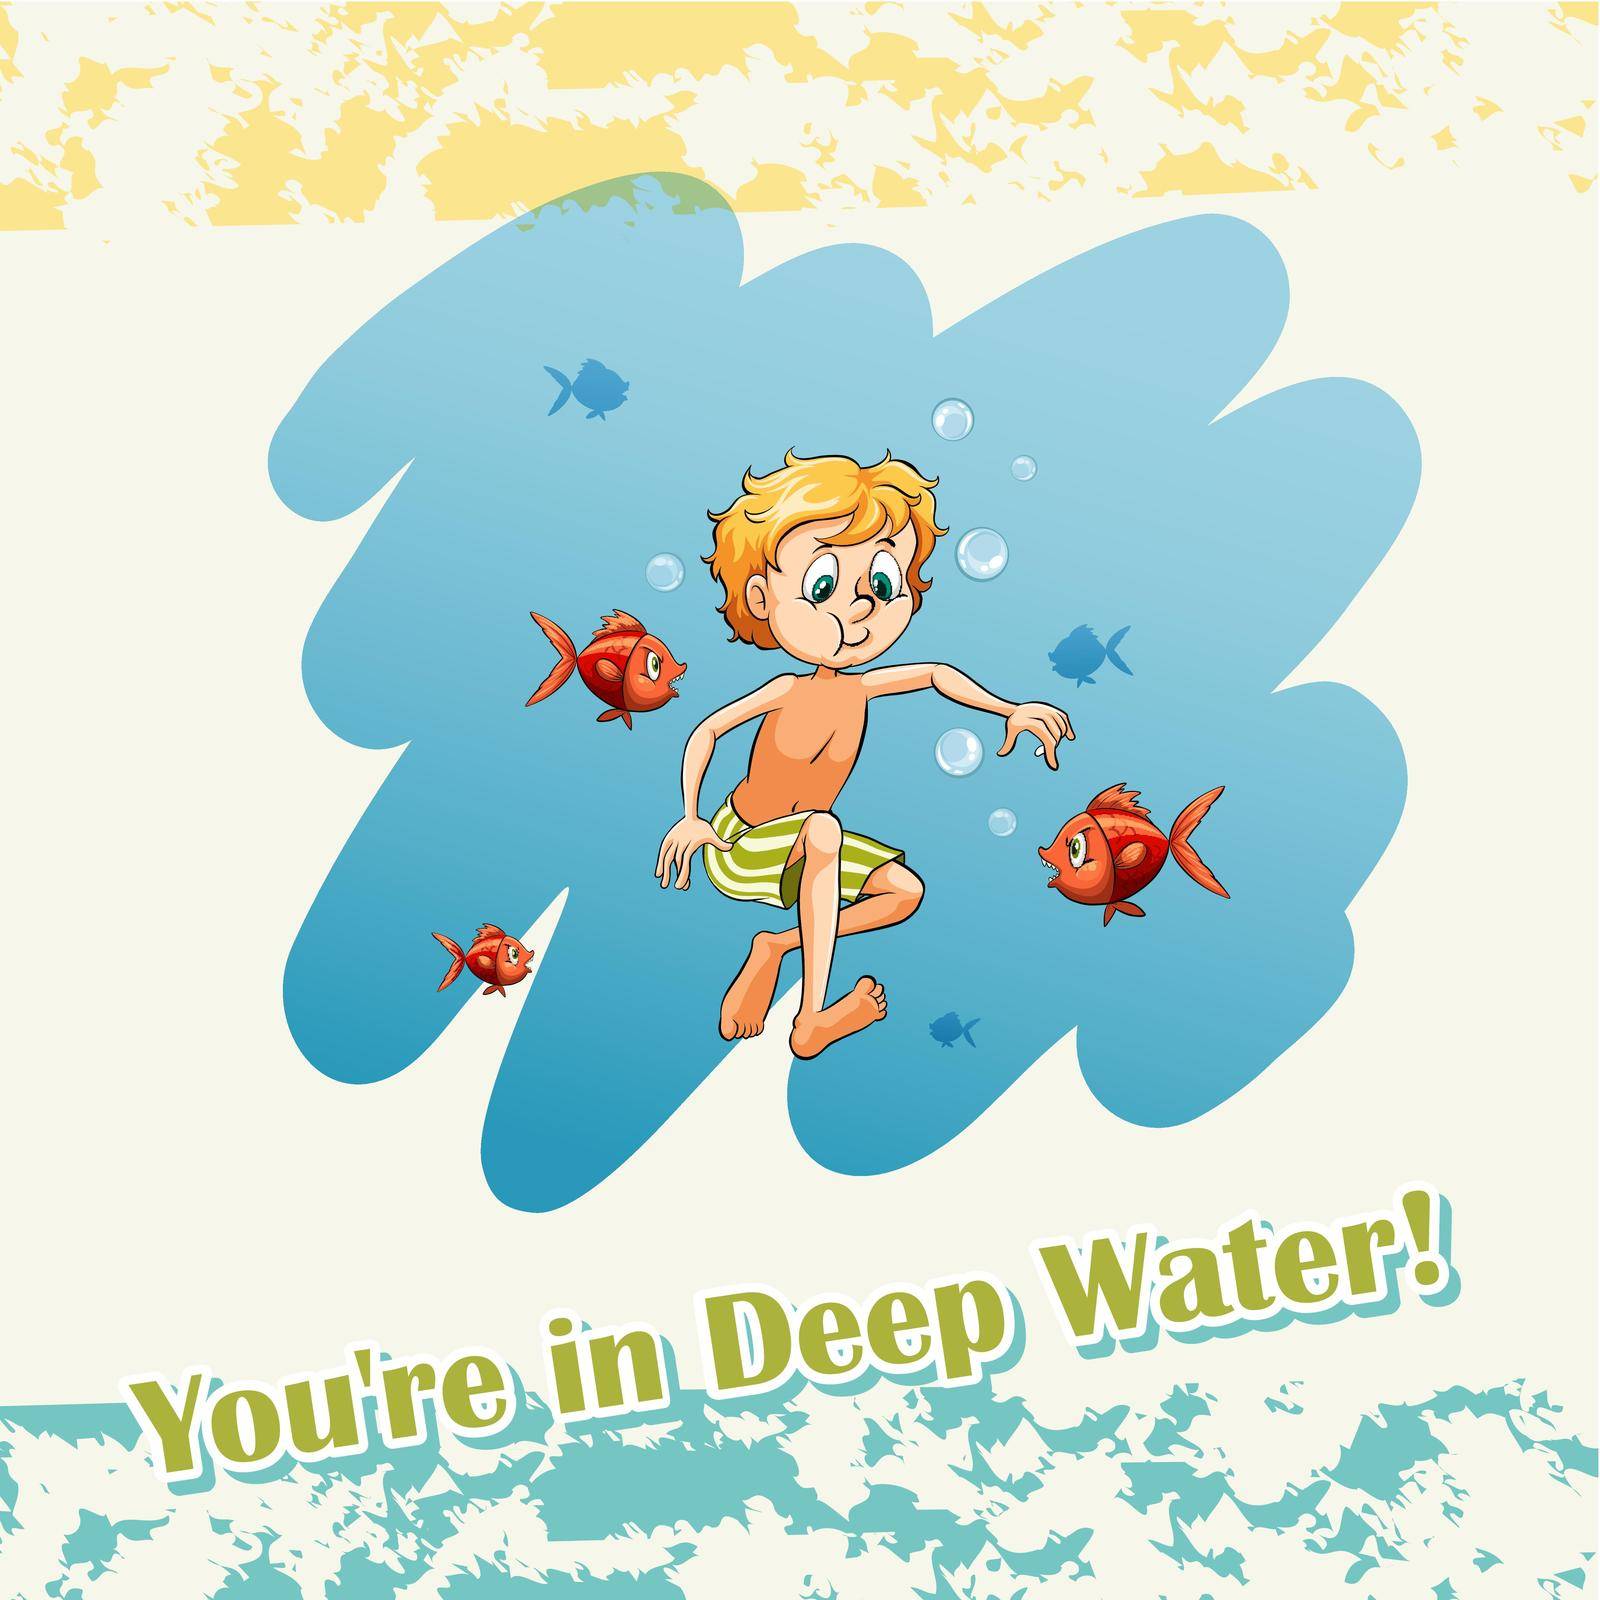 You are in deep water illustration